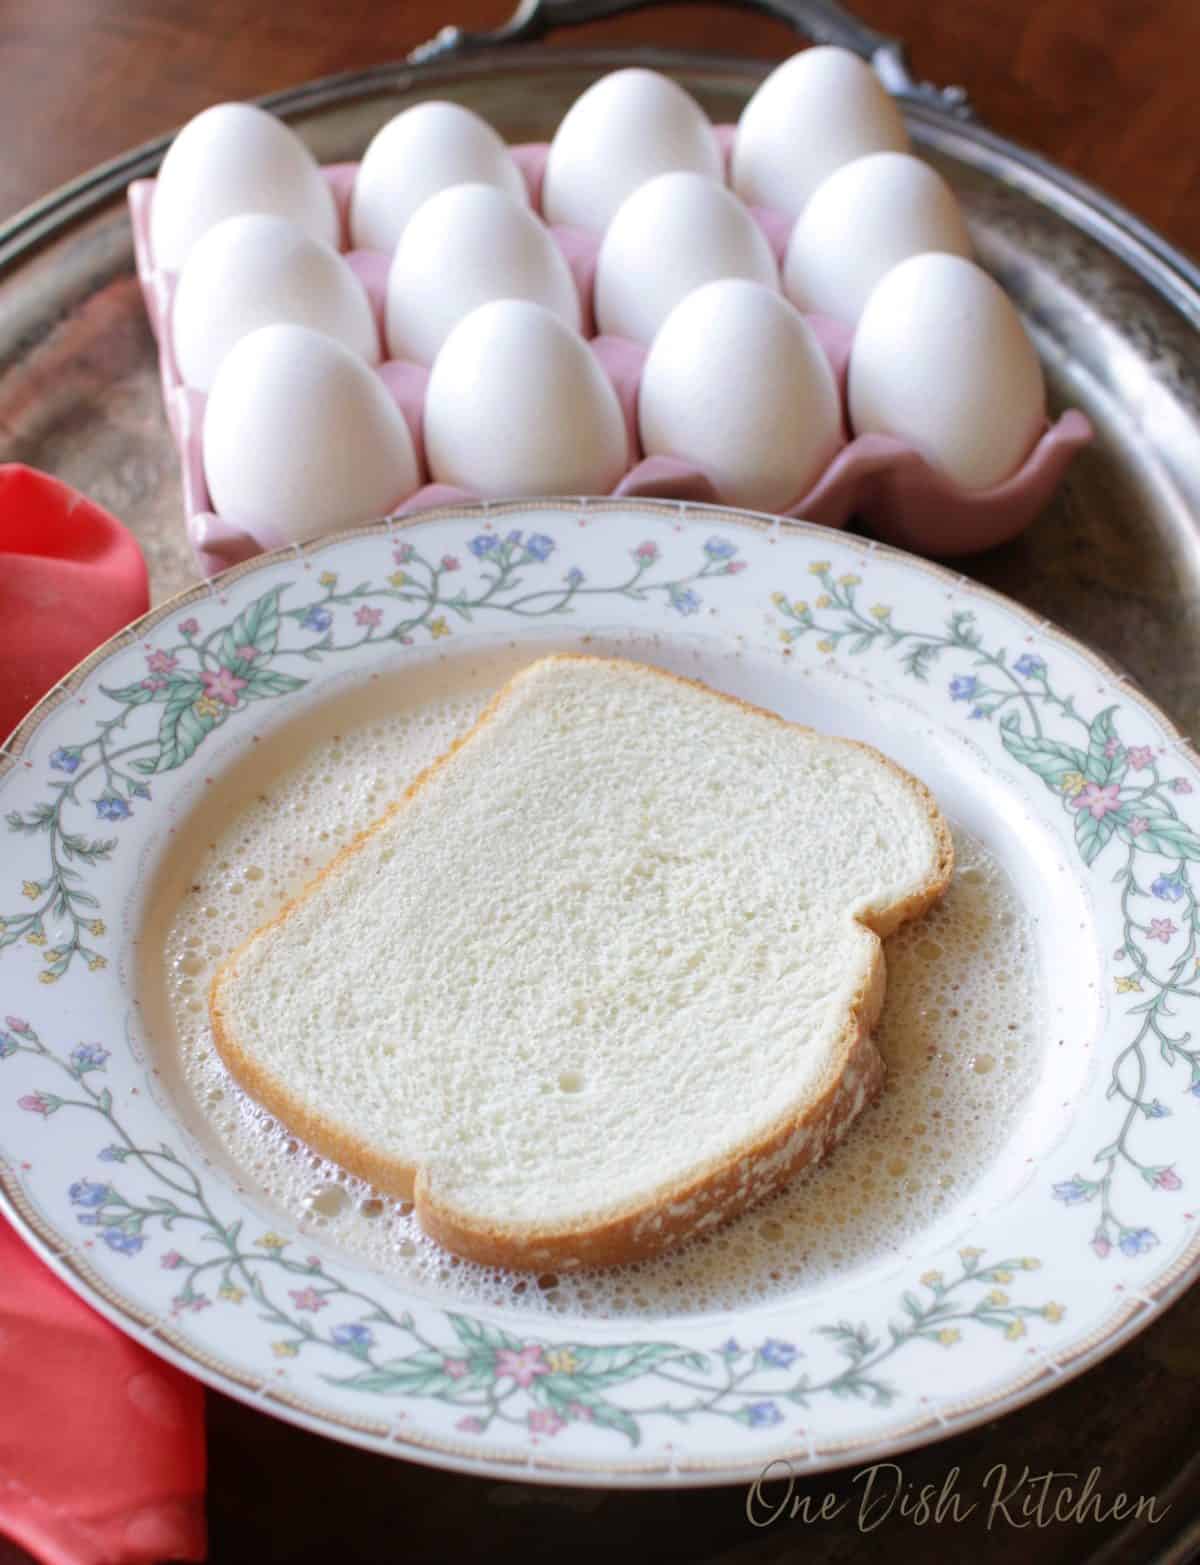 A slice of white bread soaking in milk before making french toast on a metal tray with a tray of a dozen eggs and a red cloth napkin